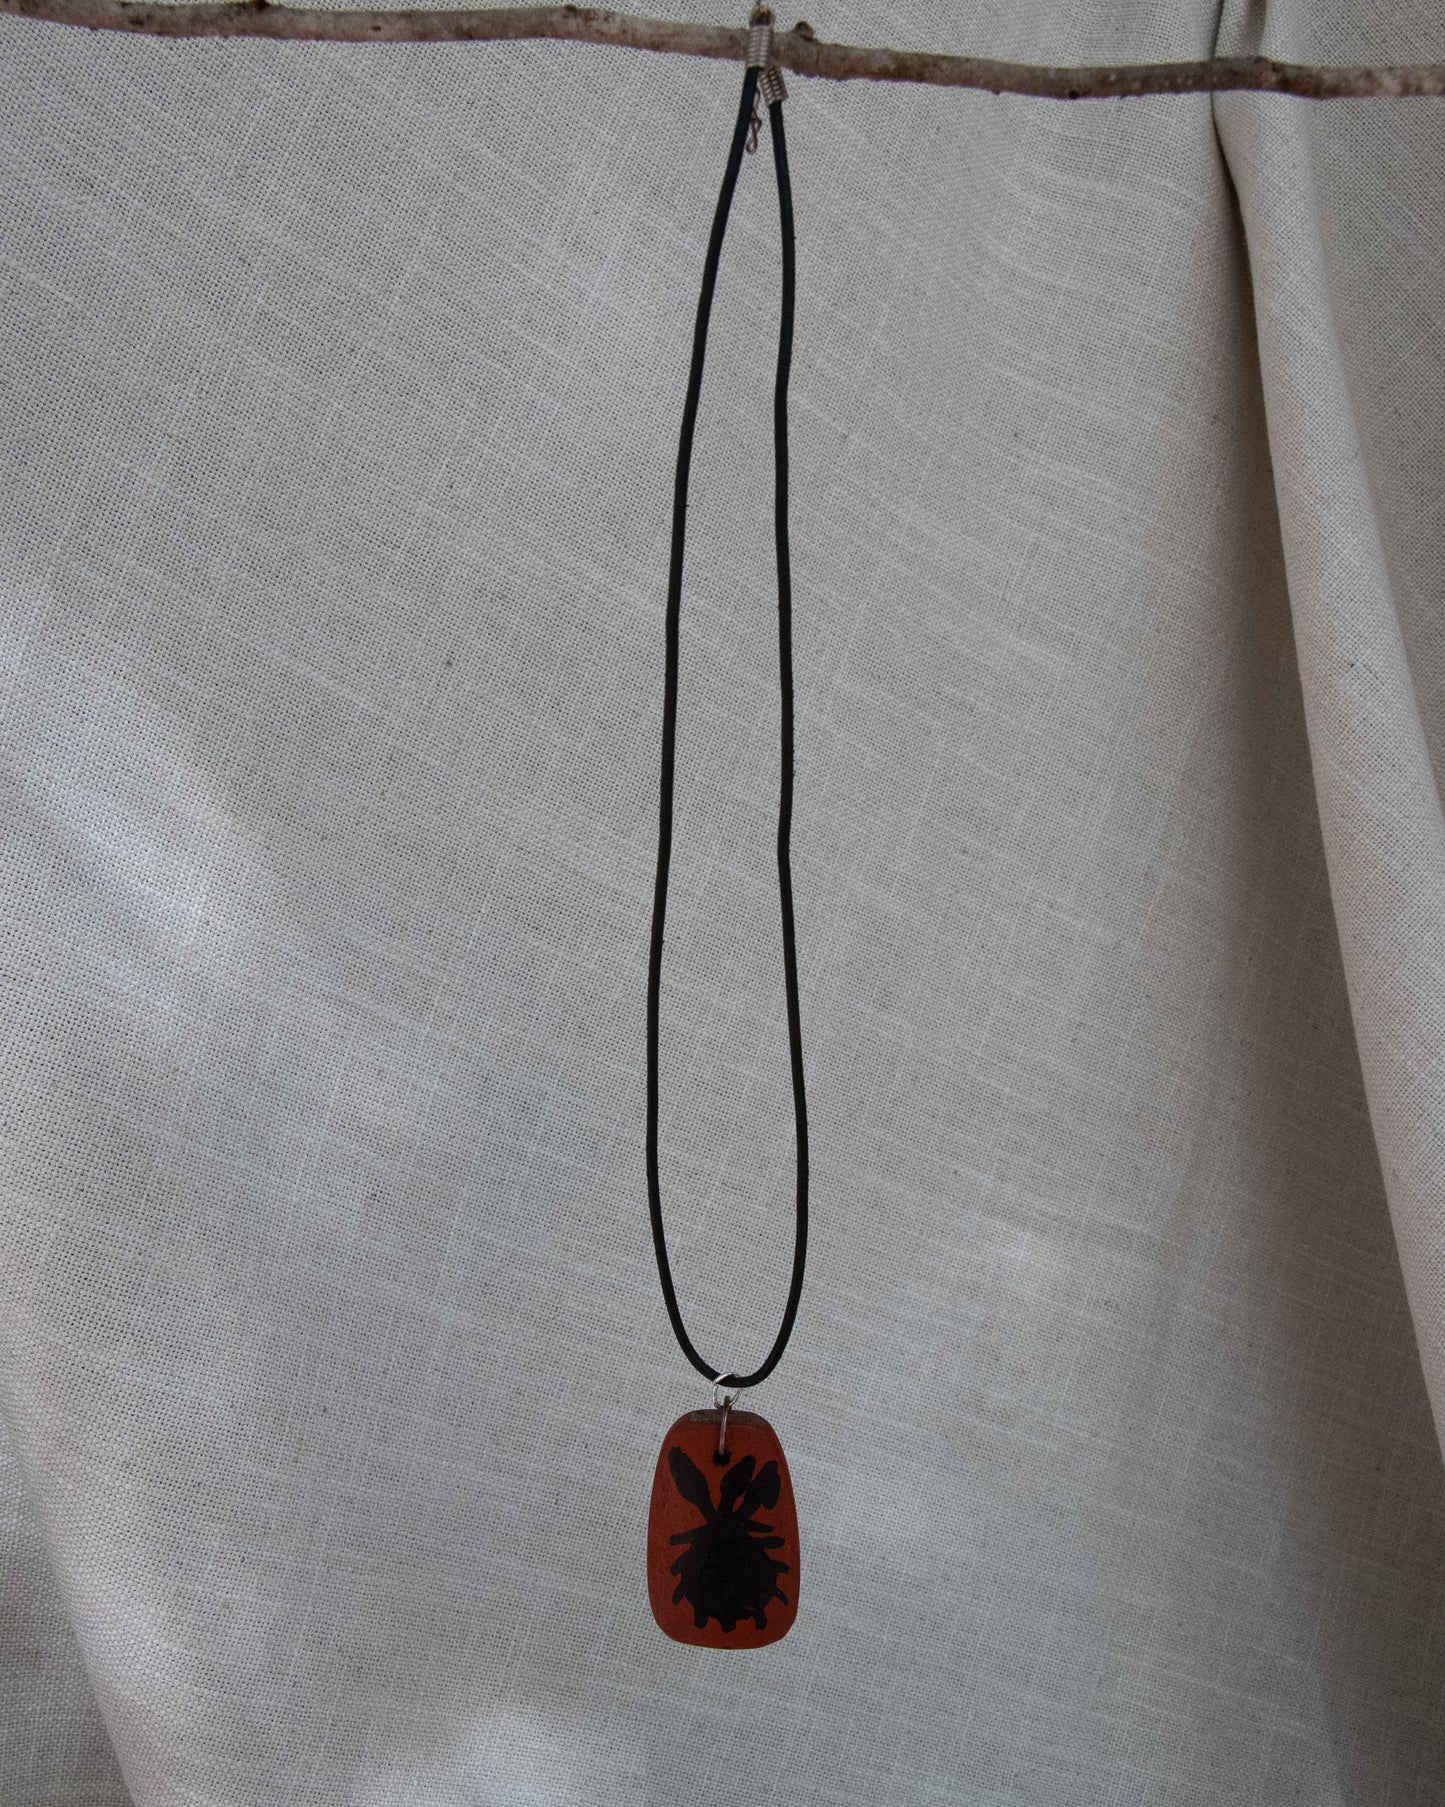 Cheeky Yam Necklace by Lynne Nadjowh